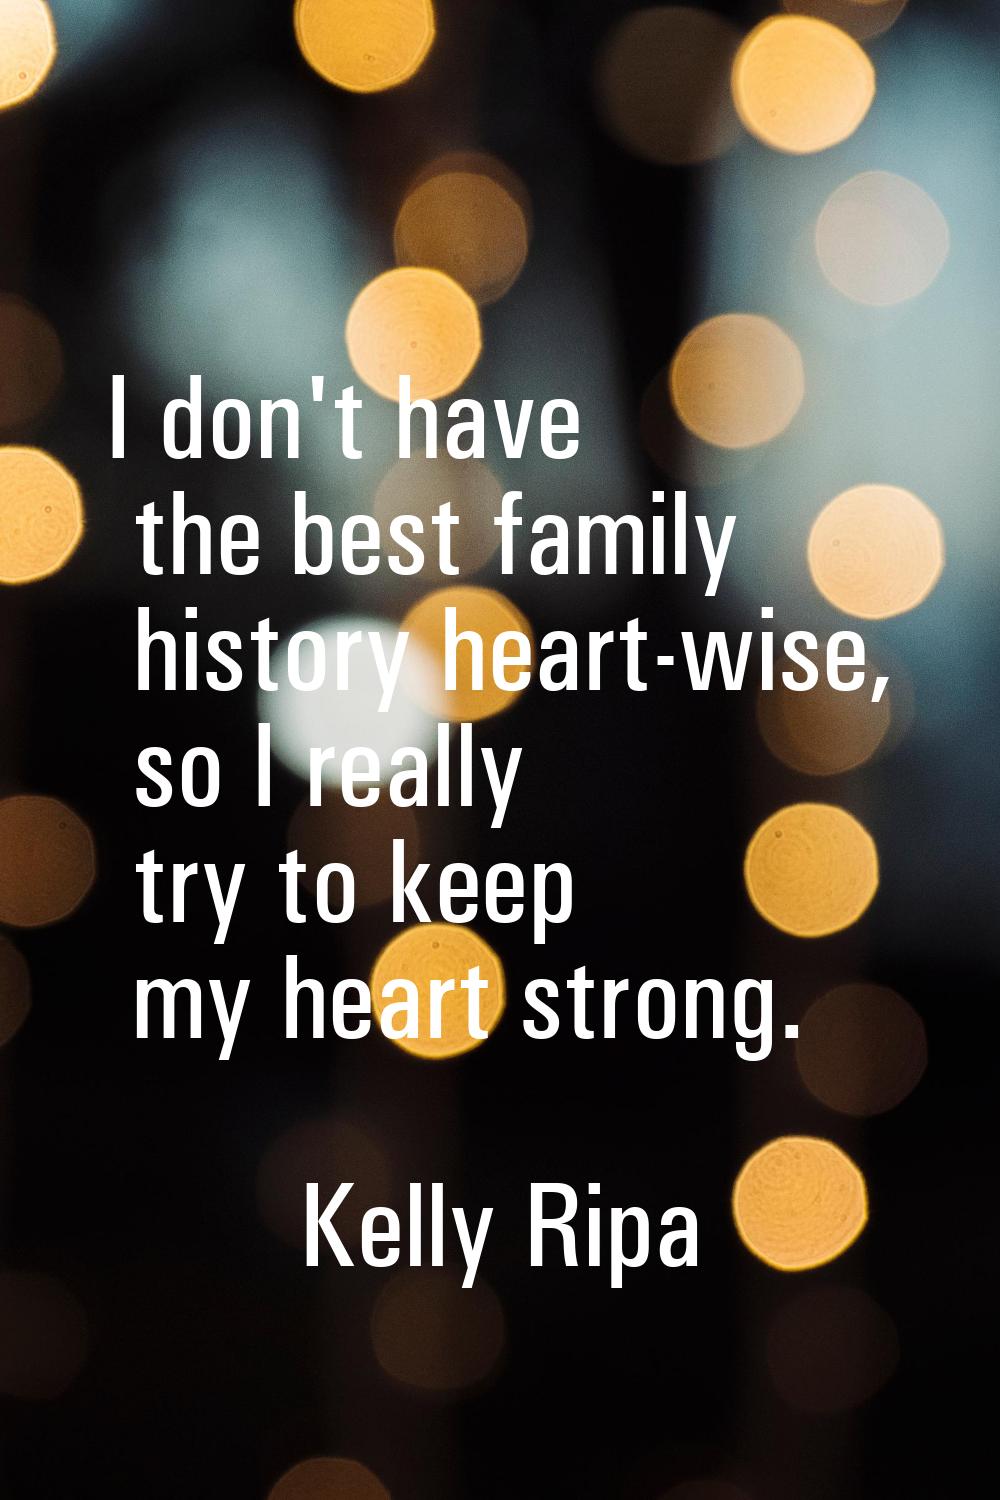 I don't have the best family history heart-wise, so I really try to keep my heart strong.